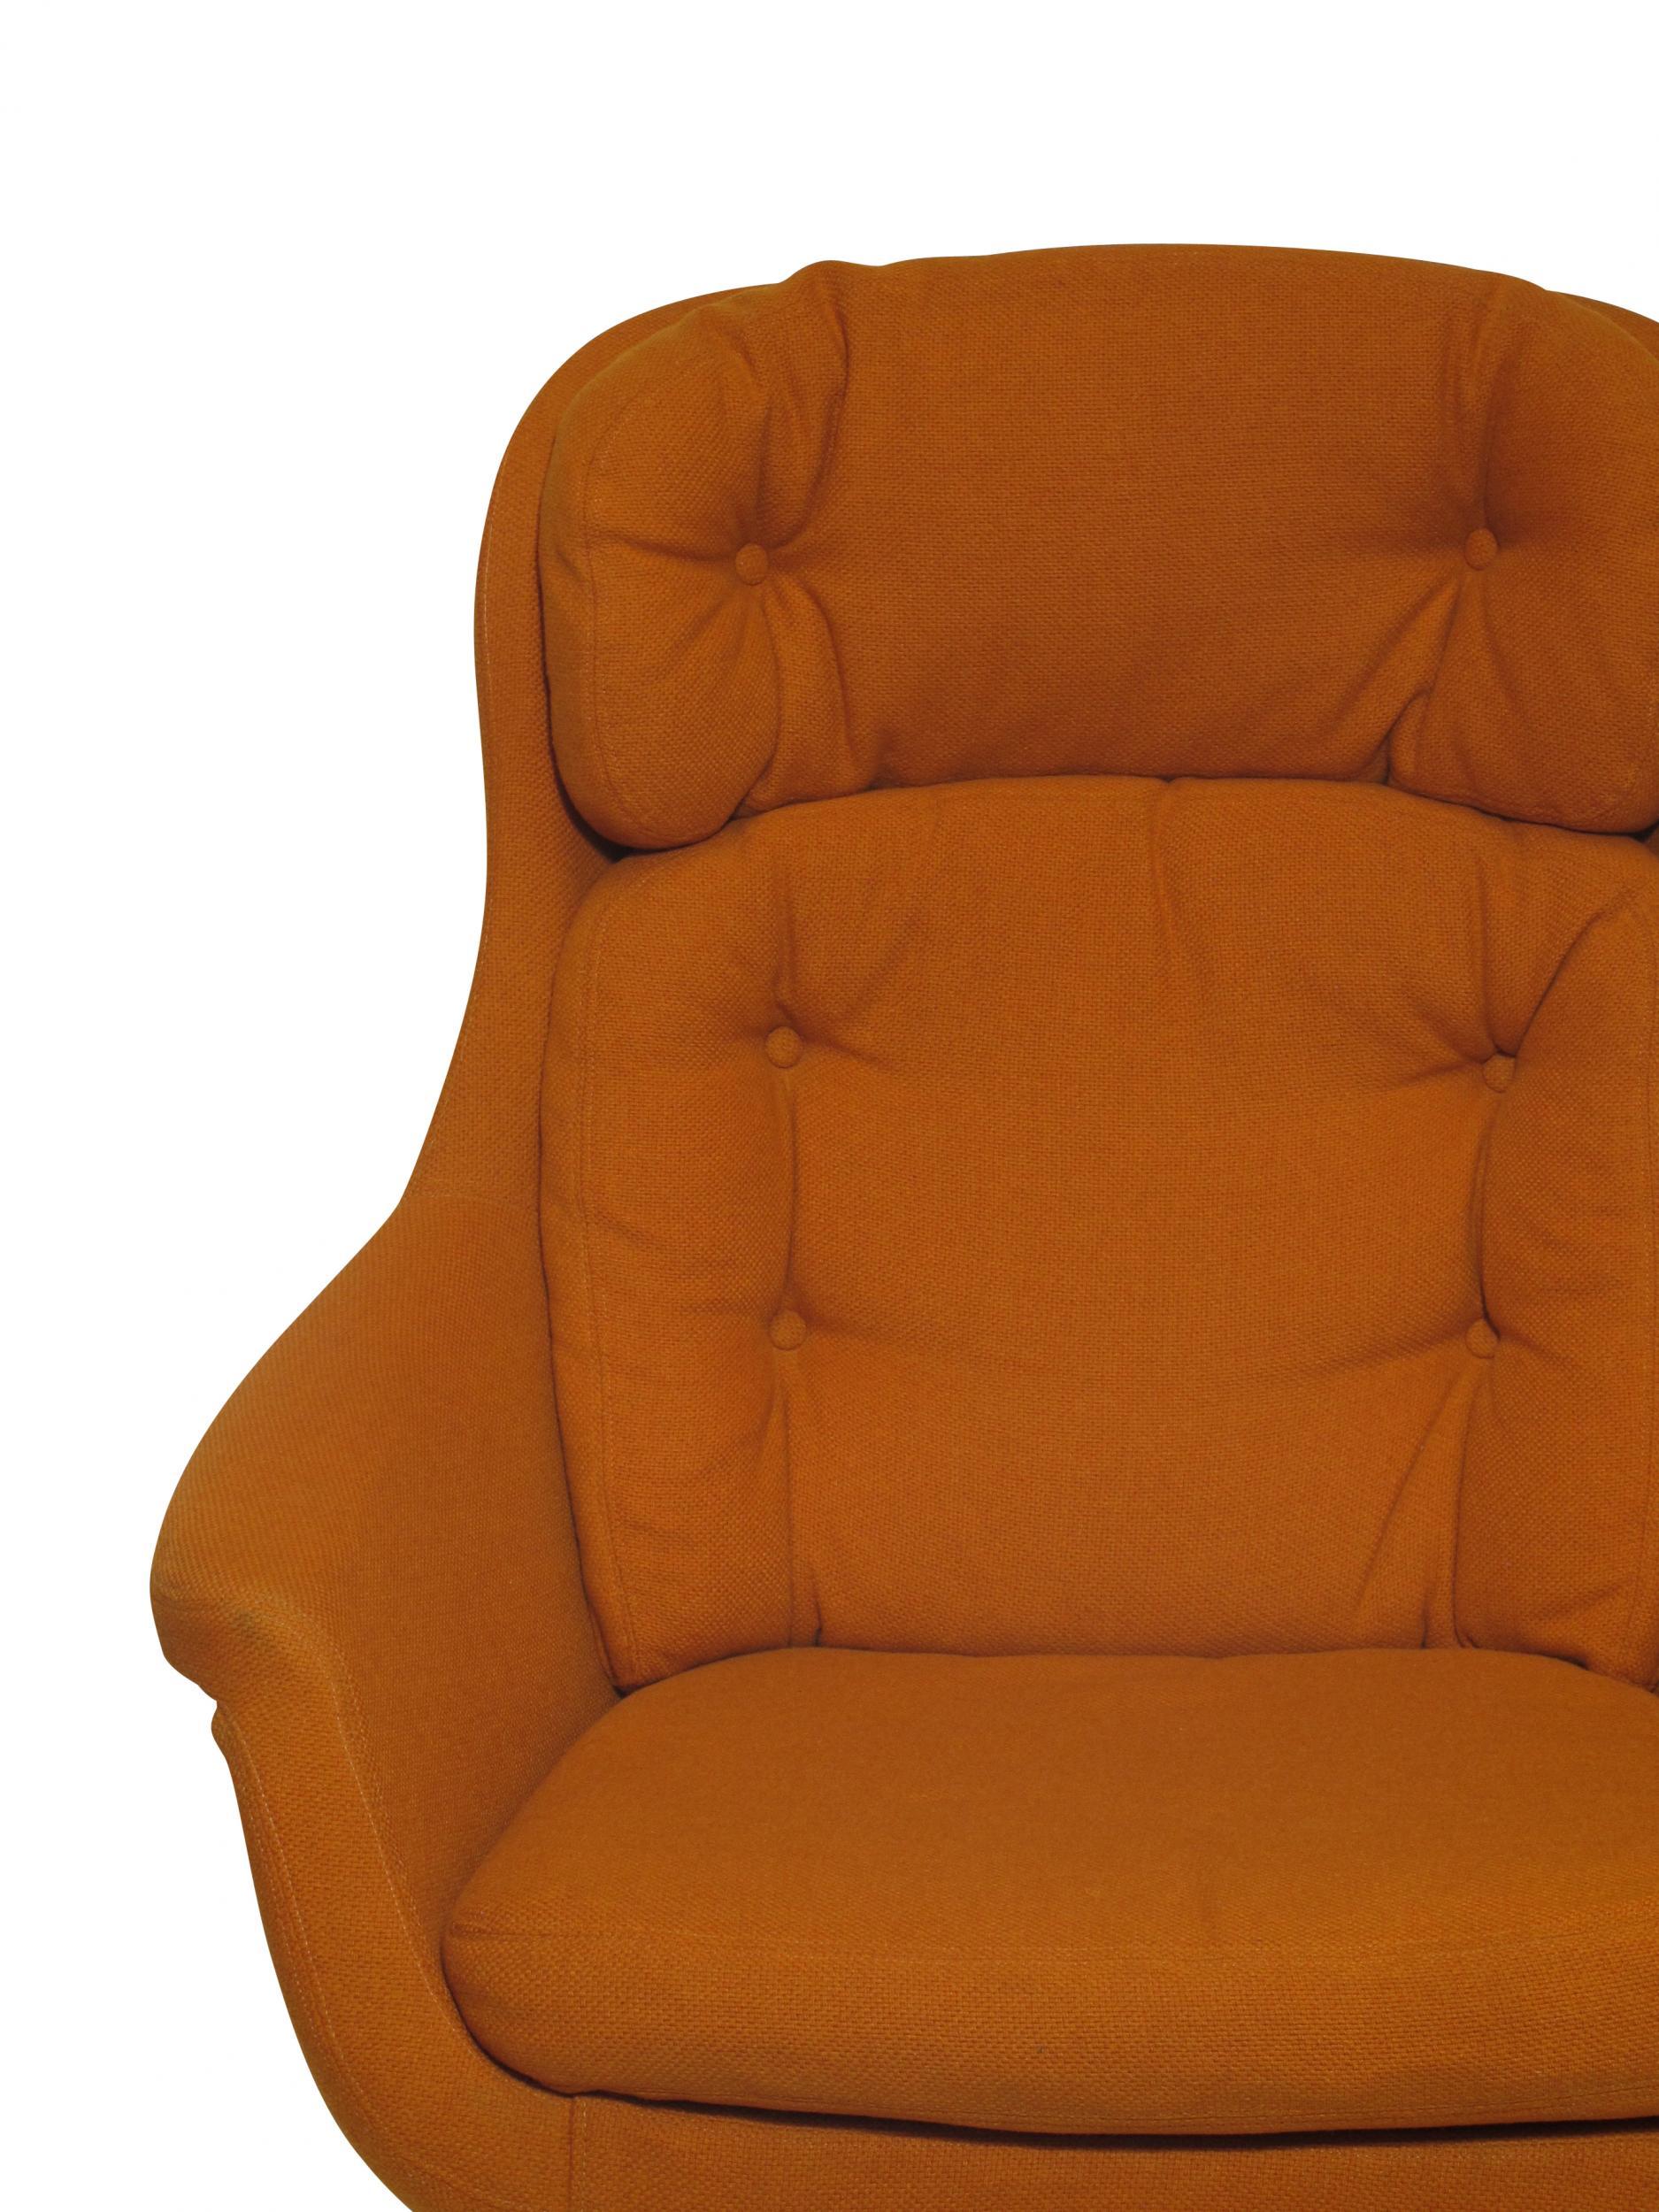 Midcentury chair for Selig manufactured in Sweden. Chair swivel and tilts and in original orange textile.